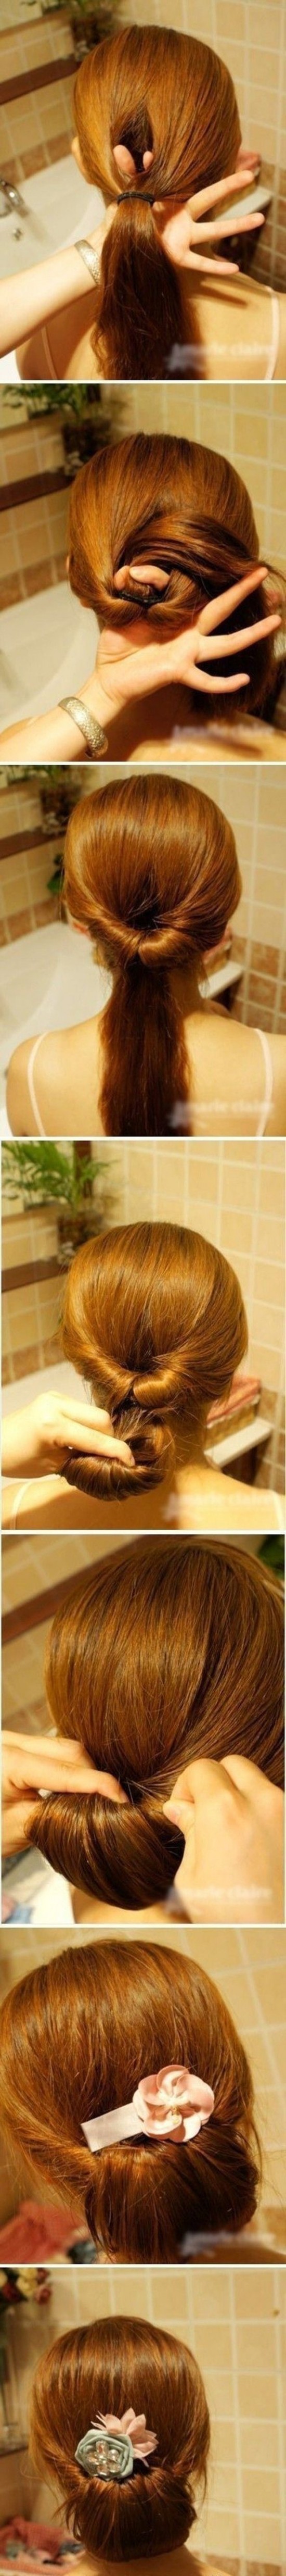 Creative-Hairstyles-That-You-Can-Easily-Do-at-Home-026